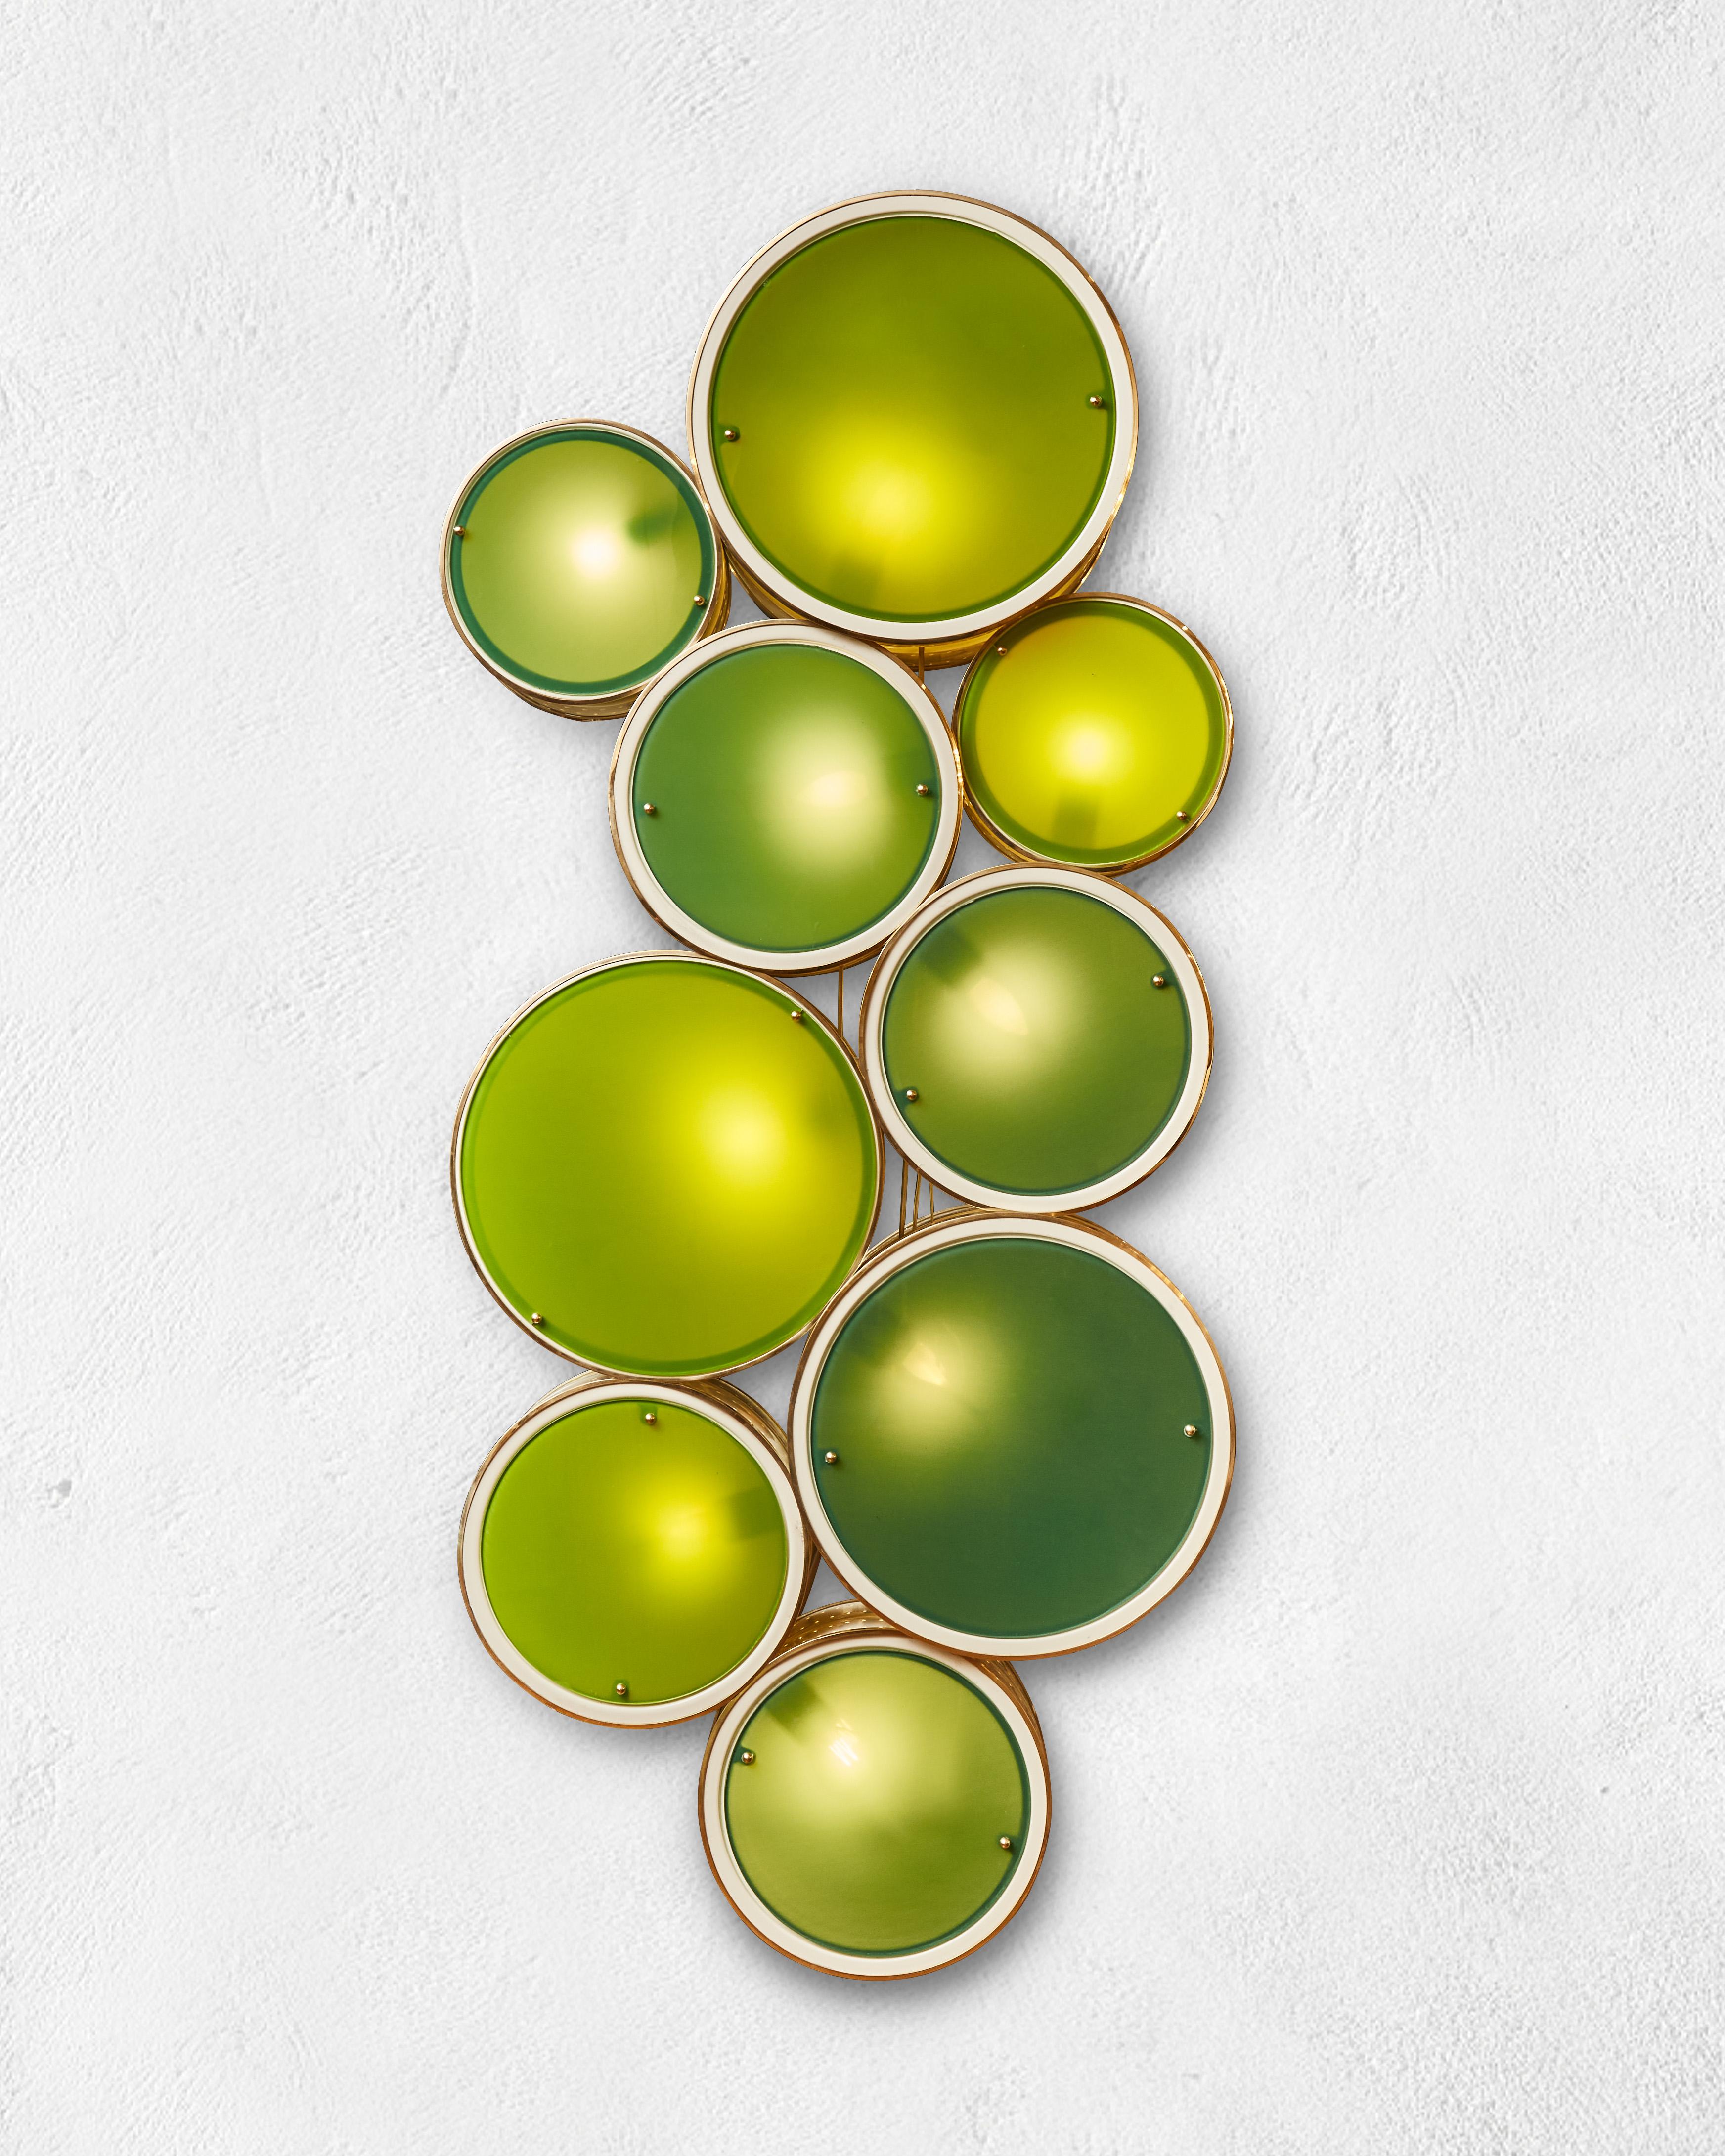 Wall light sconce in white lacquered metal with green tainted Murano glasses.
Creation by Studio Glustin.
Can also be used as a ceiling light.

Dimensions: 70 x H 165 cm.